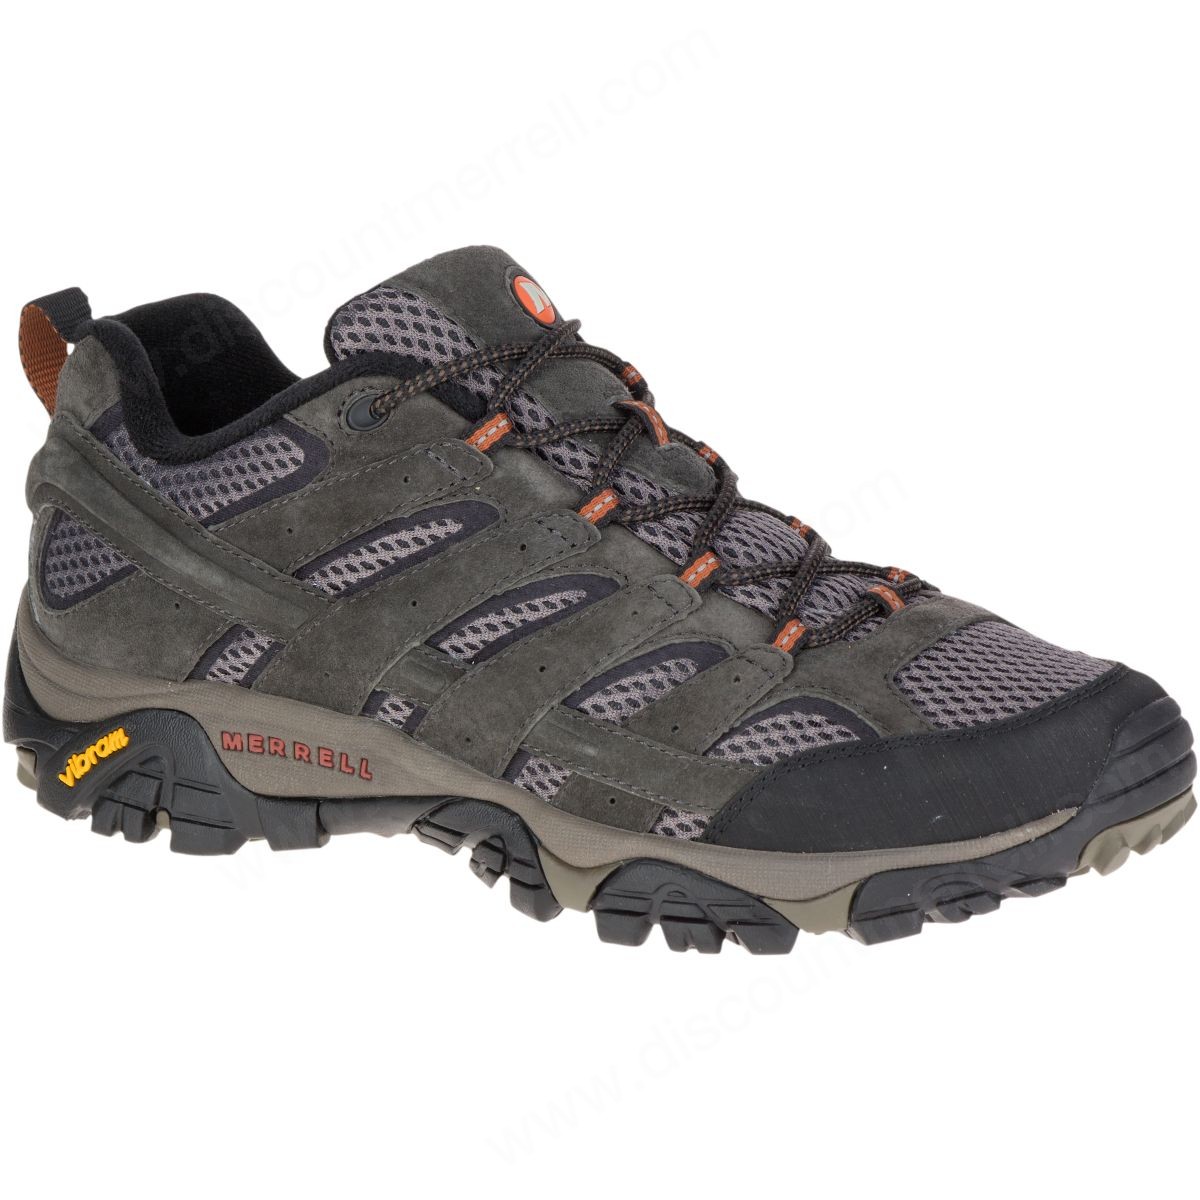 Merrell Men's Moab Mother Of All Boots™ Ventilator Wide Width Beluga - Merrell Men's Moab Mother Of All Boots™ Ventilator Wide Width Beluga